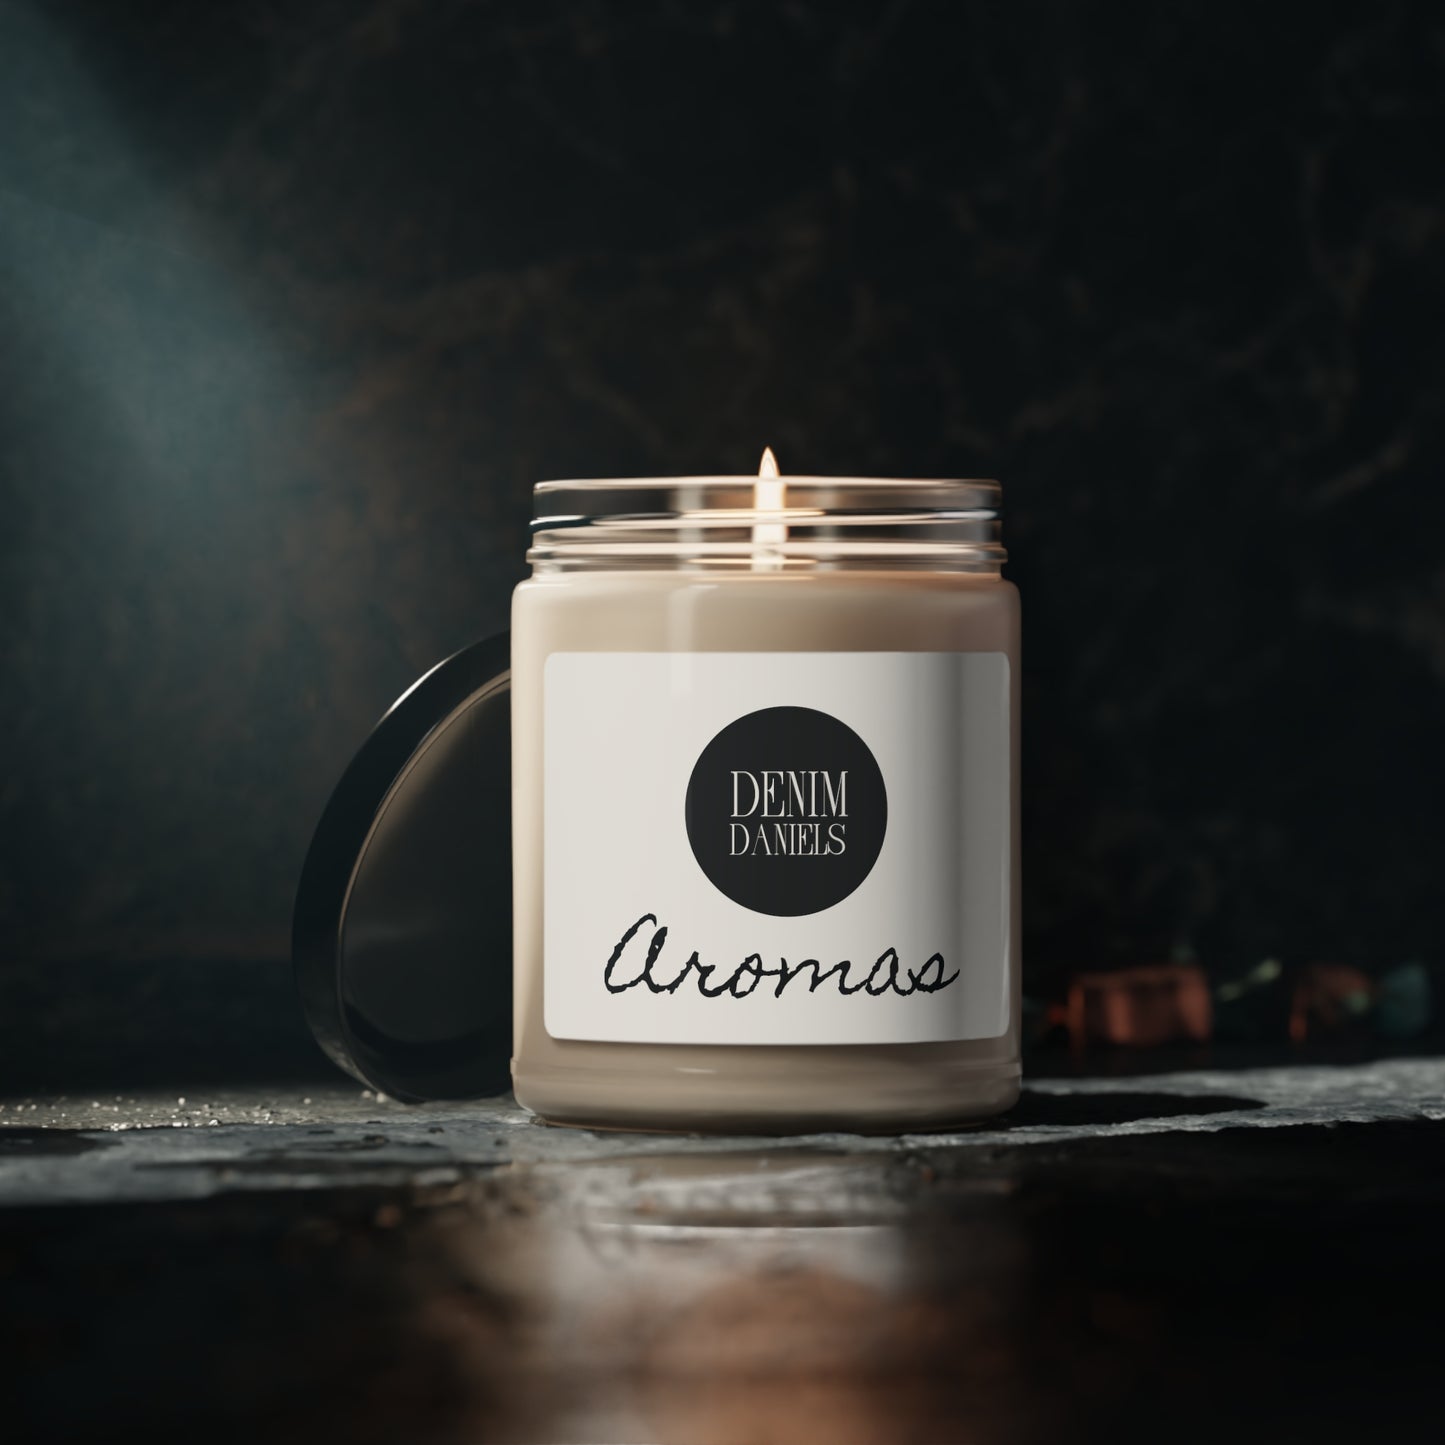 Demin Daniels Aromas Scented Soy Candle, 9oz